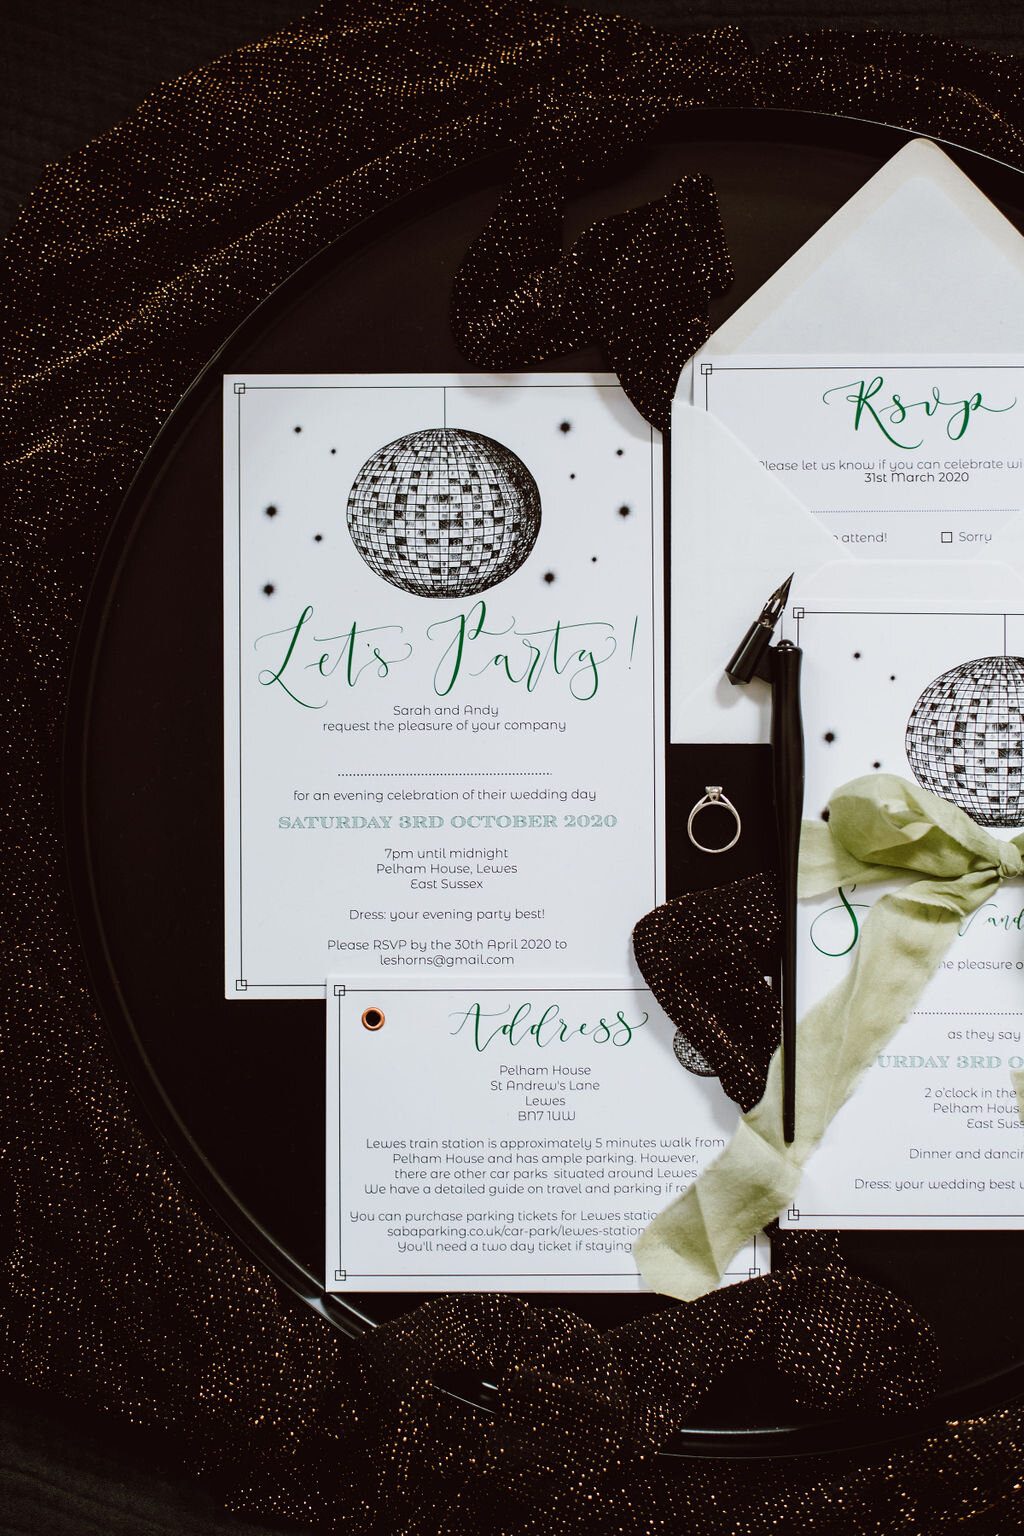 Disco ball invites -  Let's party eco friendly invitations made from recycled paper - Pelham House wedding stationery - forest green and copper.jpg